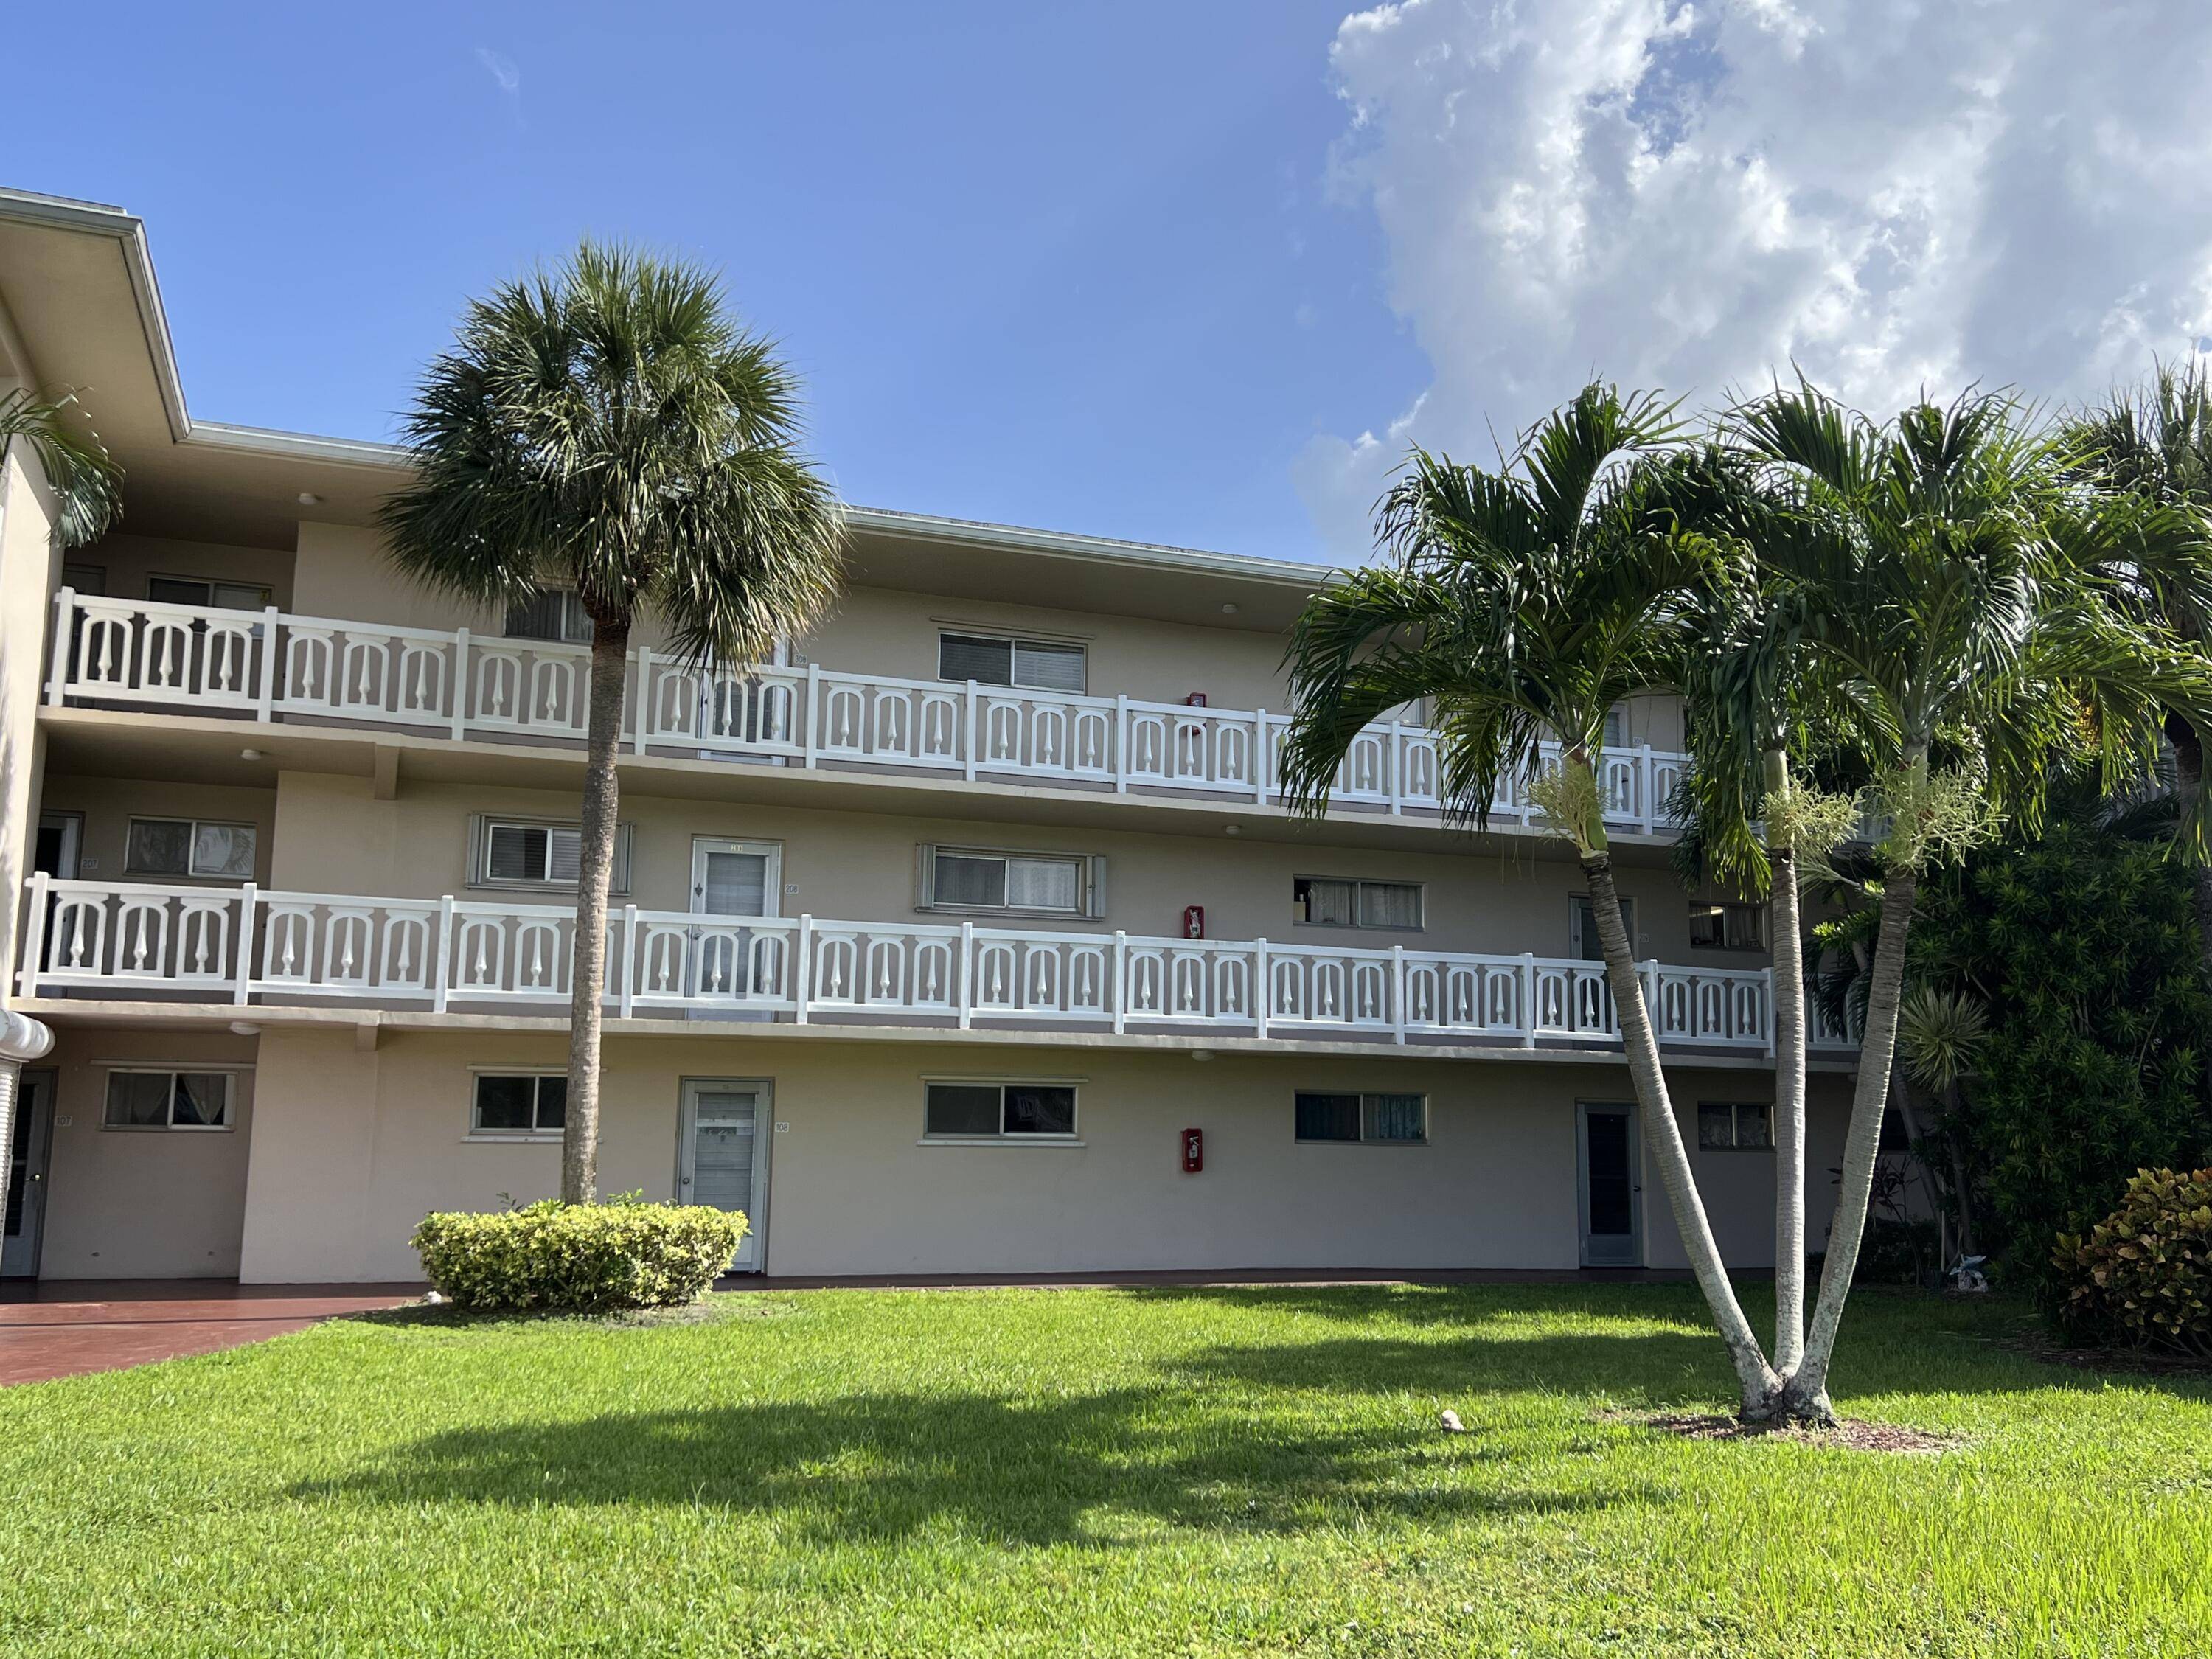 Come and enjoy the beautiful weather of the Palm Beaches at year long or seasonally at a very affordable price, take advantage of this well manicured 55 plus community and ...